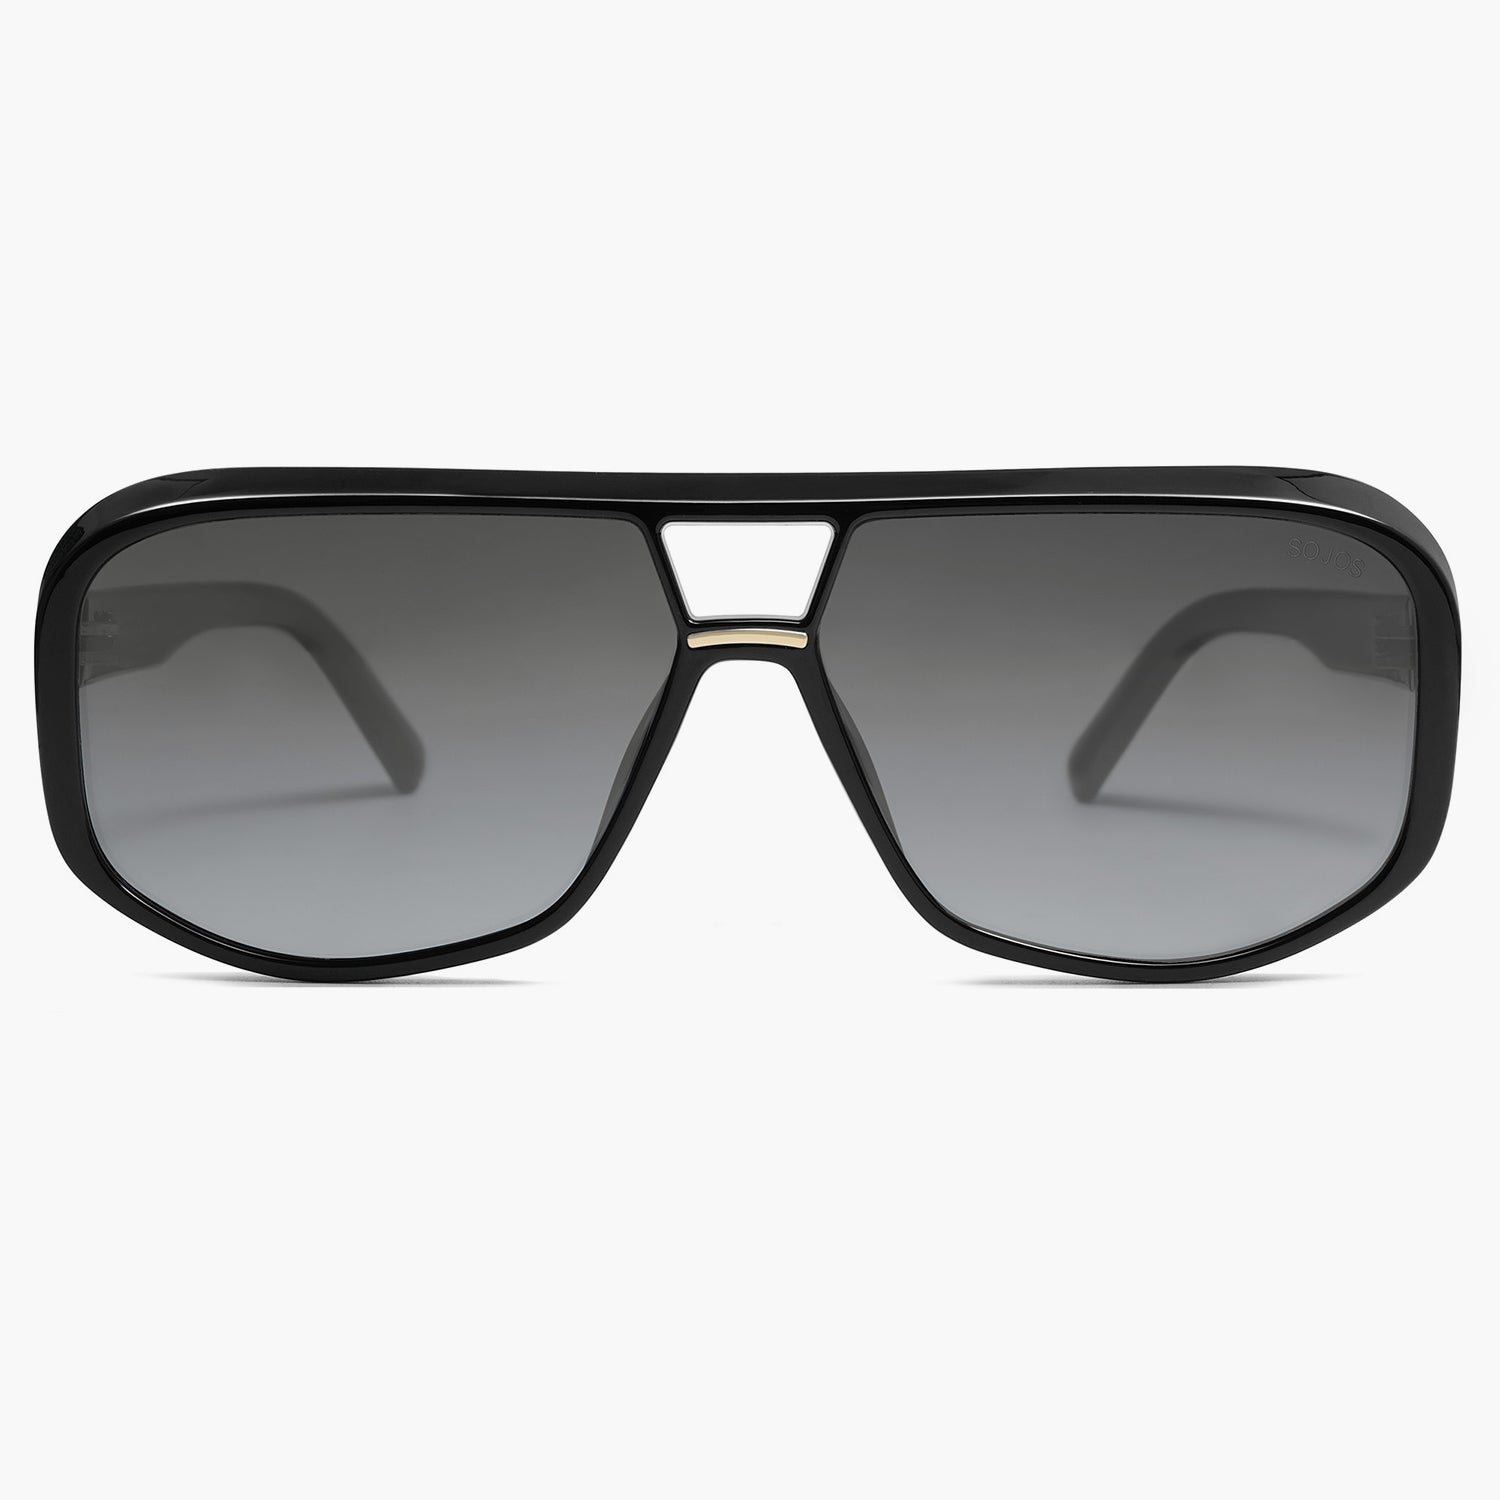 SOJOS Classic Square Polarized … curated on LTK